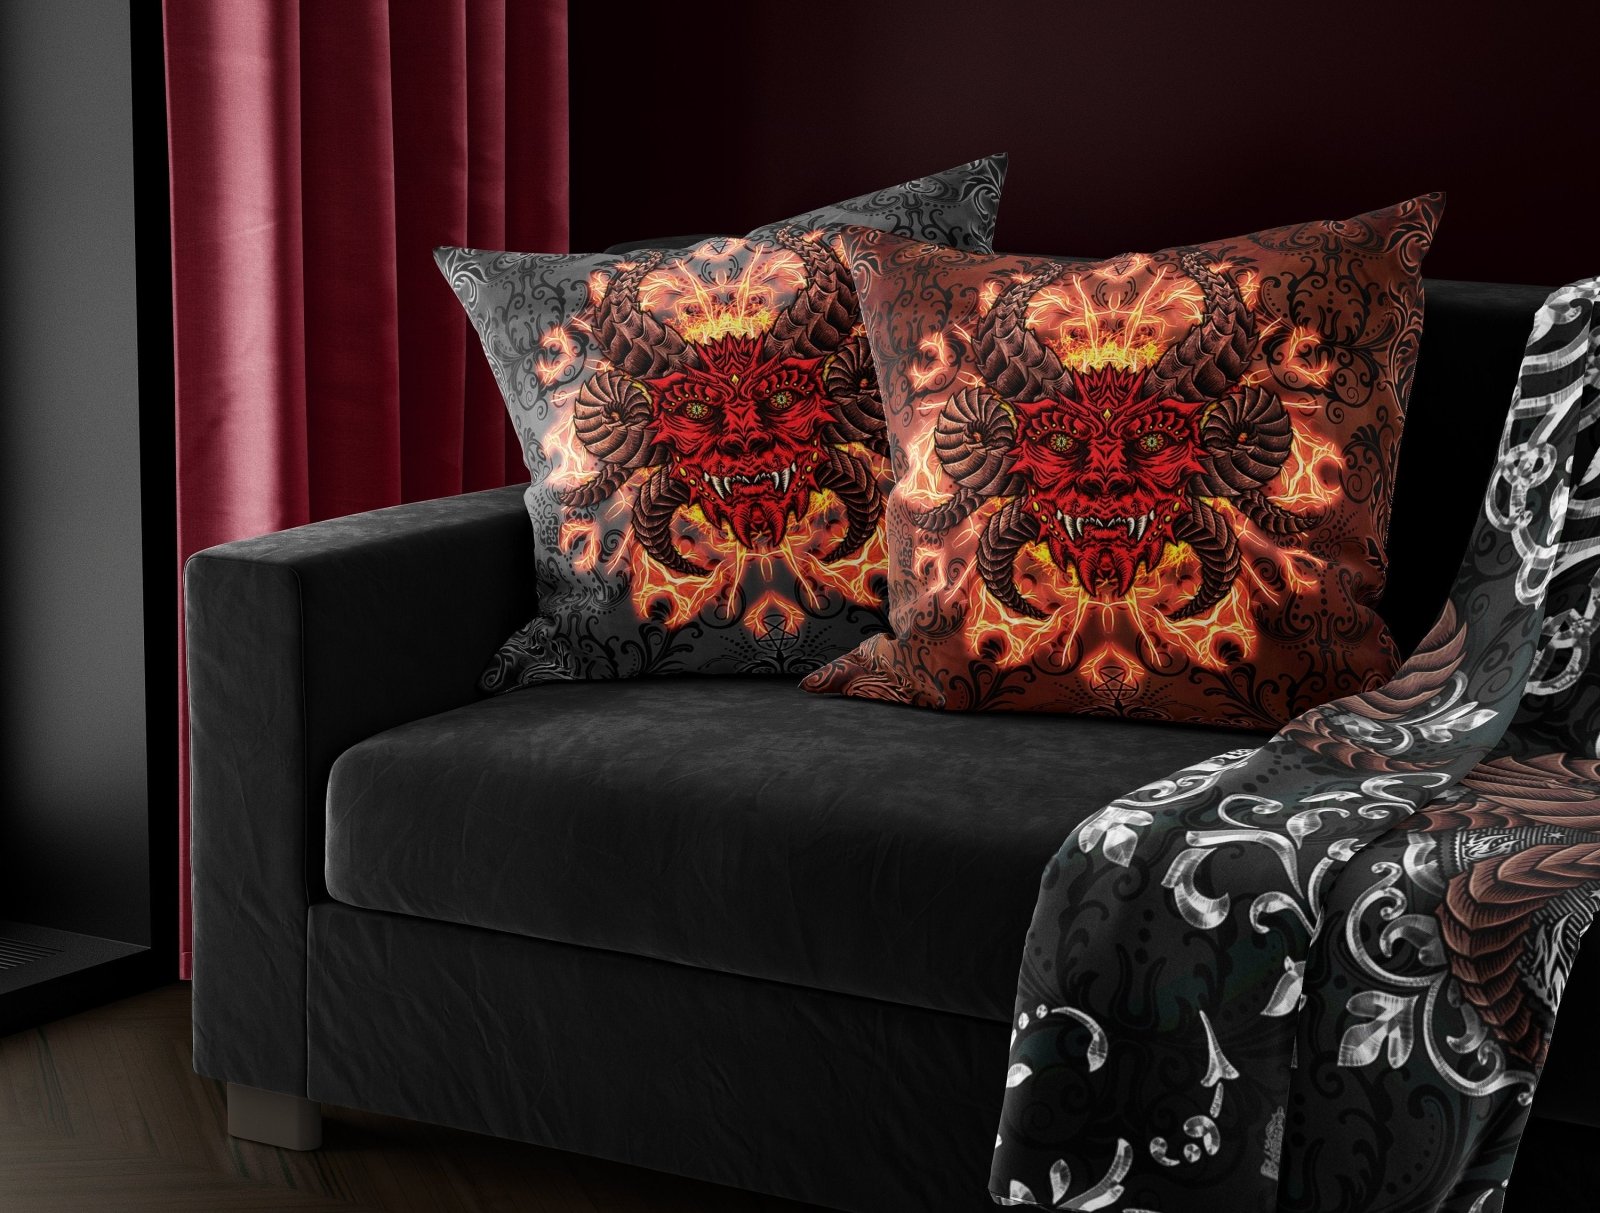 Black and Red Cross-Shaped Gothic Pillow by Devil Fashion • the